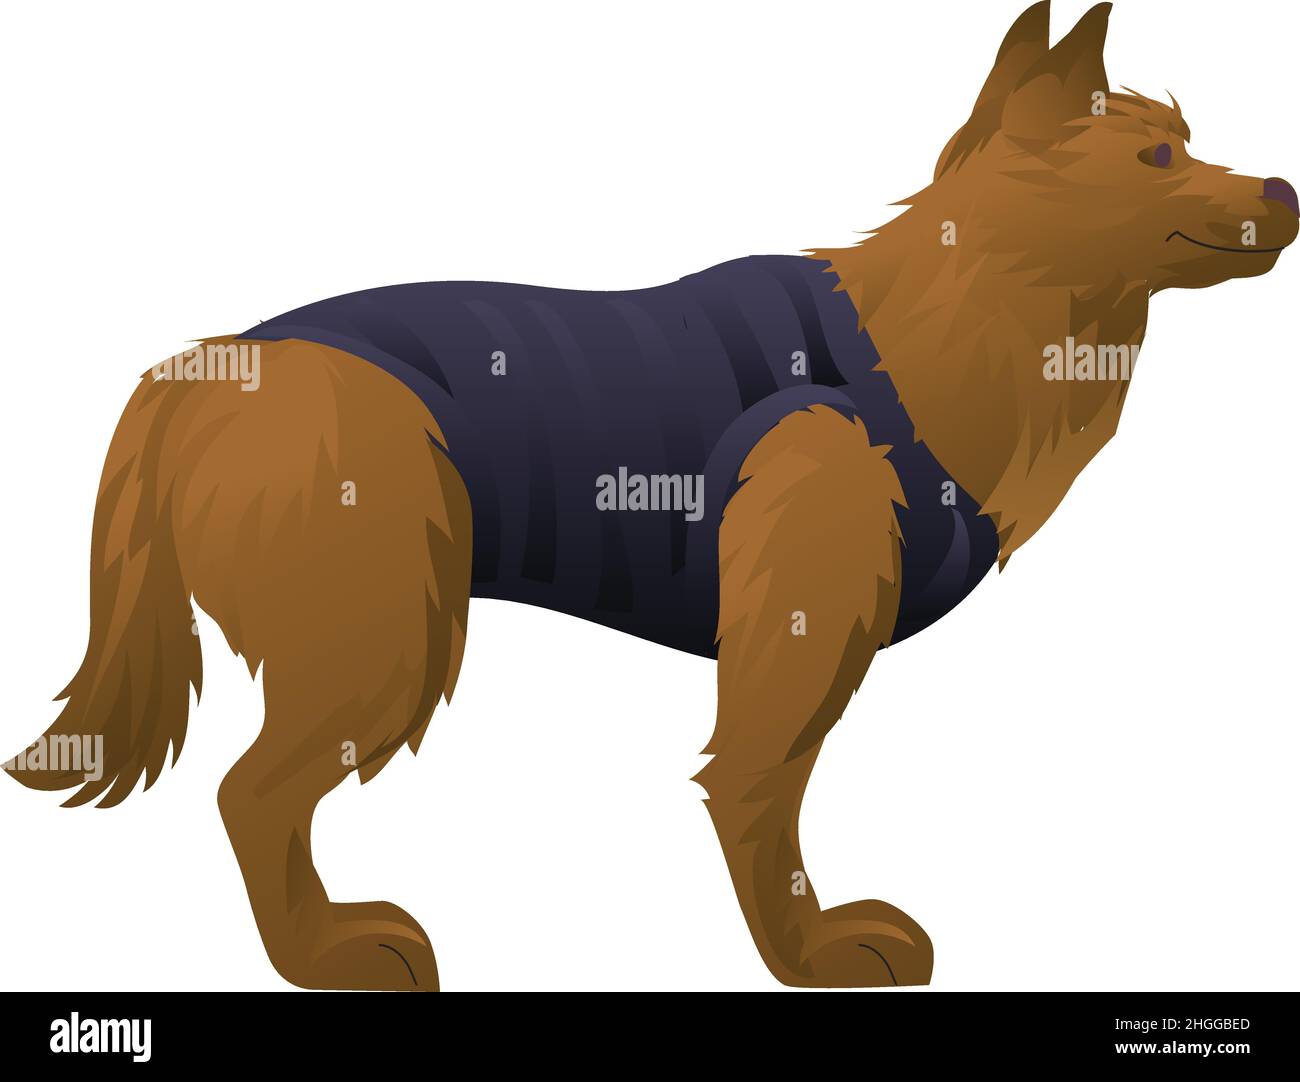 American Football  Fanny Anime German Shepherd Dog Colorful Graphic 001  Painting by Aryu  Pixels